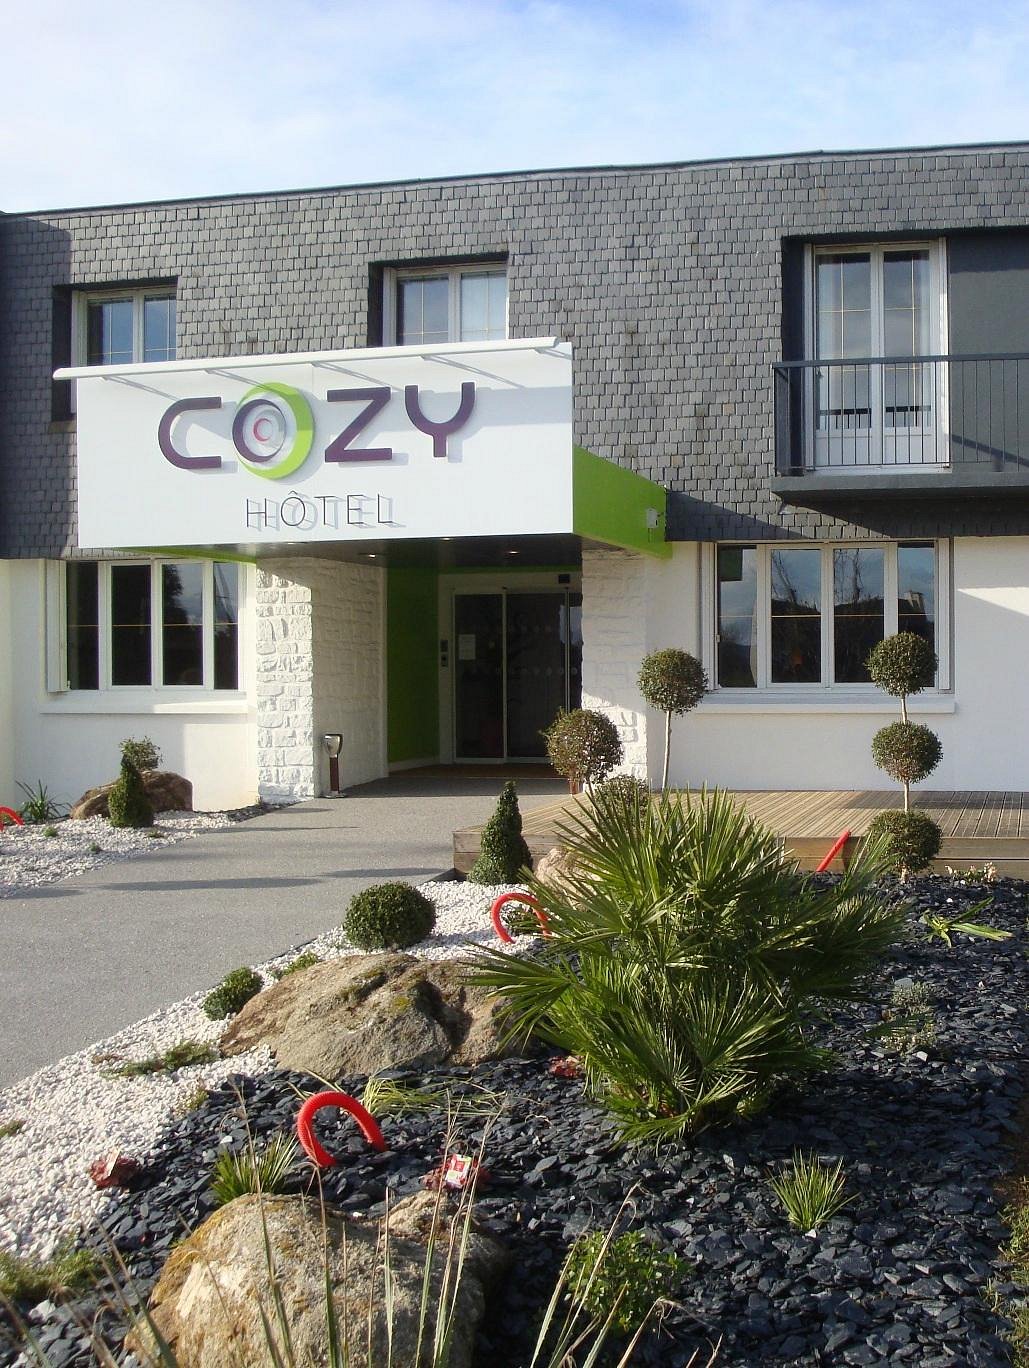 Things To Do in Cozy Hotel, Restaurants in Cozy Hotel